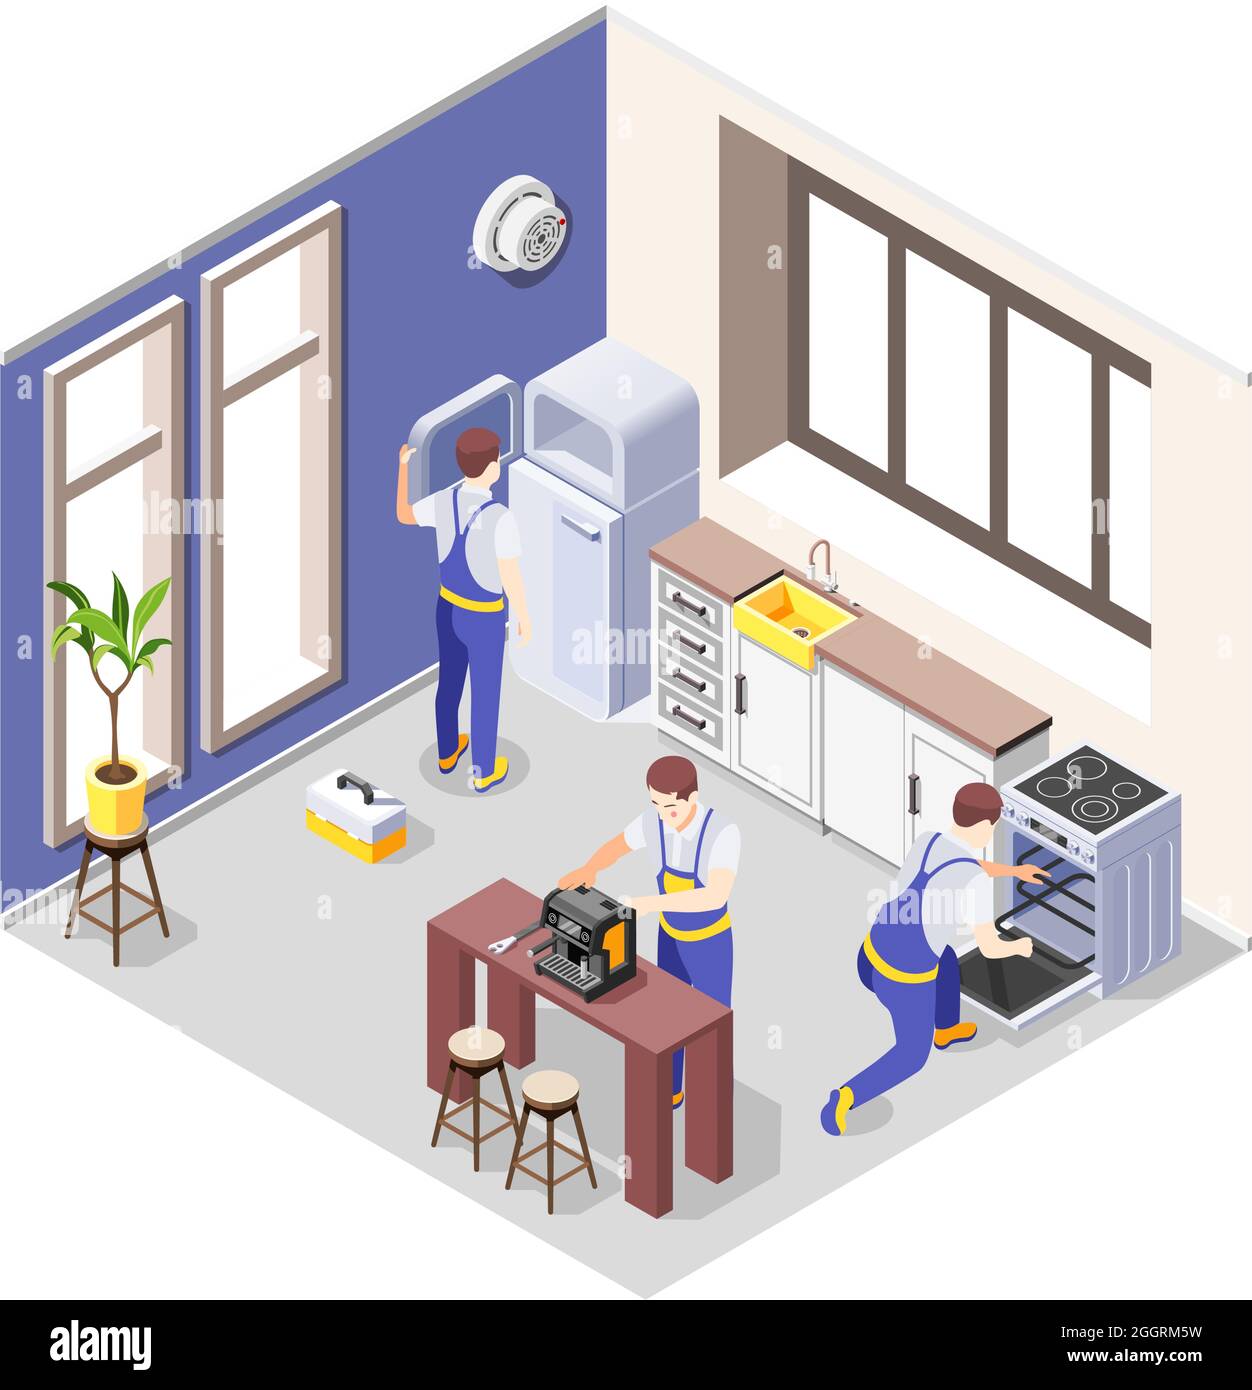 Home appliance repair service icon with three workers fixing fridge cooker coffee machine in kitchen isometric vector illustration Stock Vector